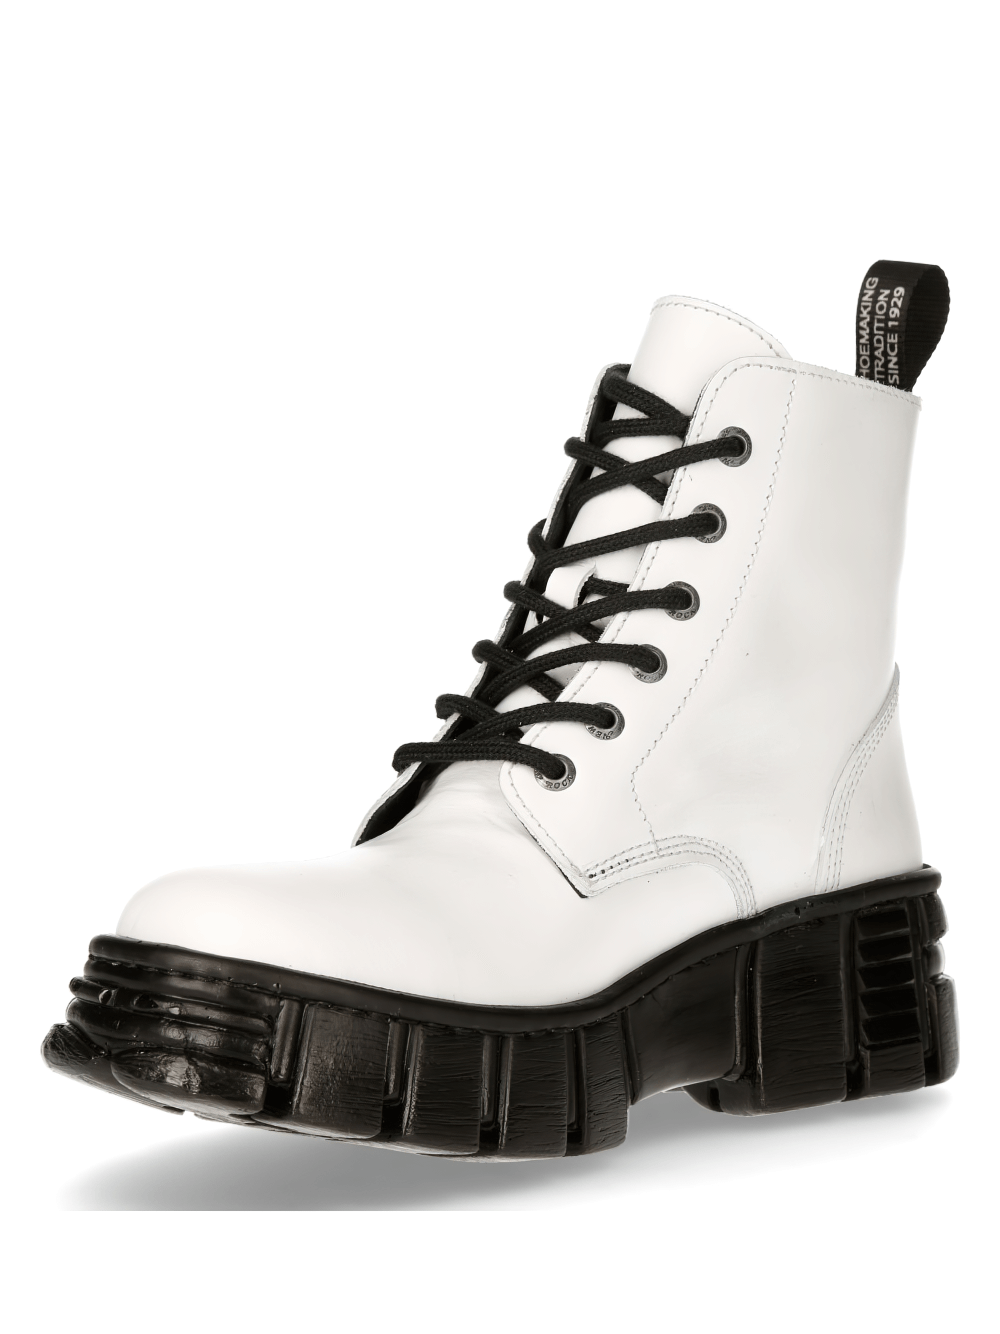 NEW ROCK White Urban Ankle Boots With Black Lace-Up